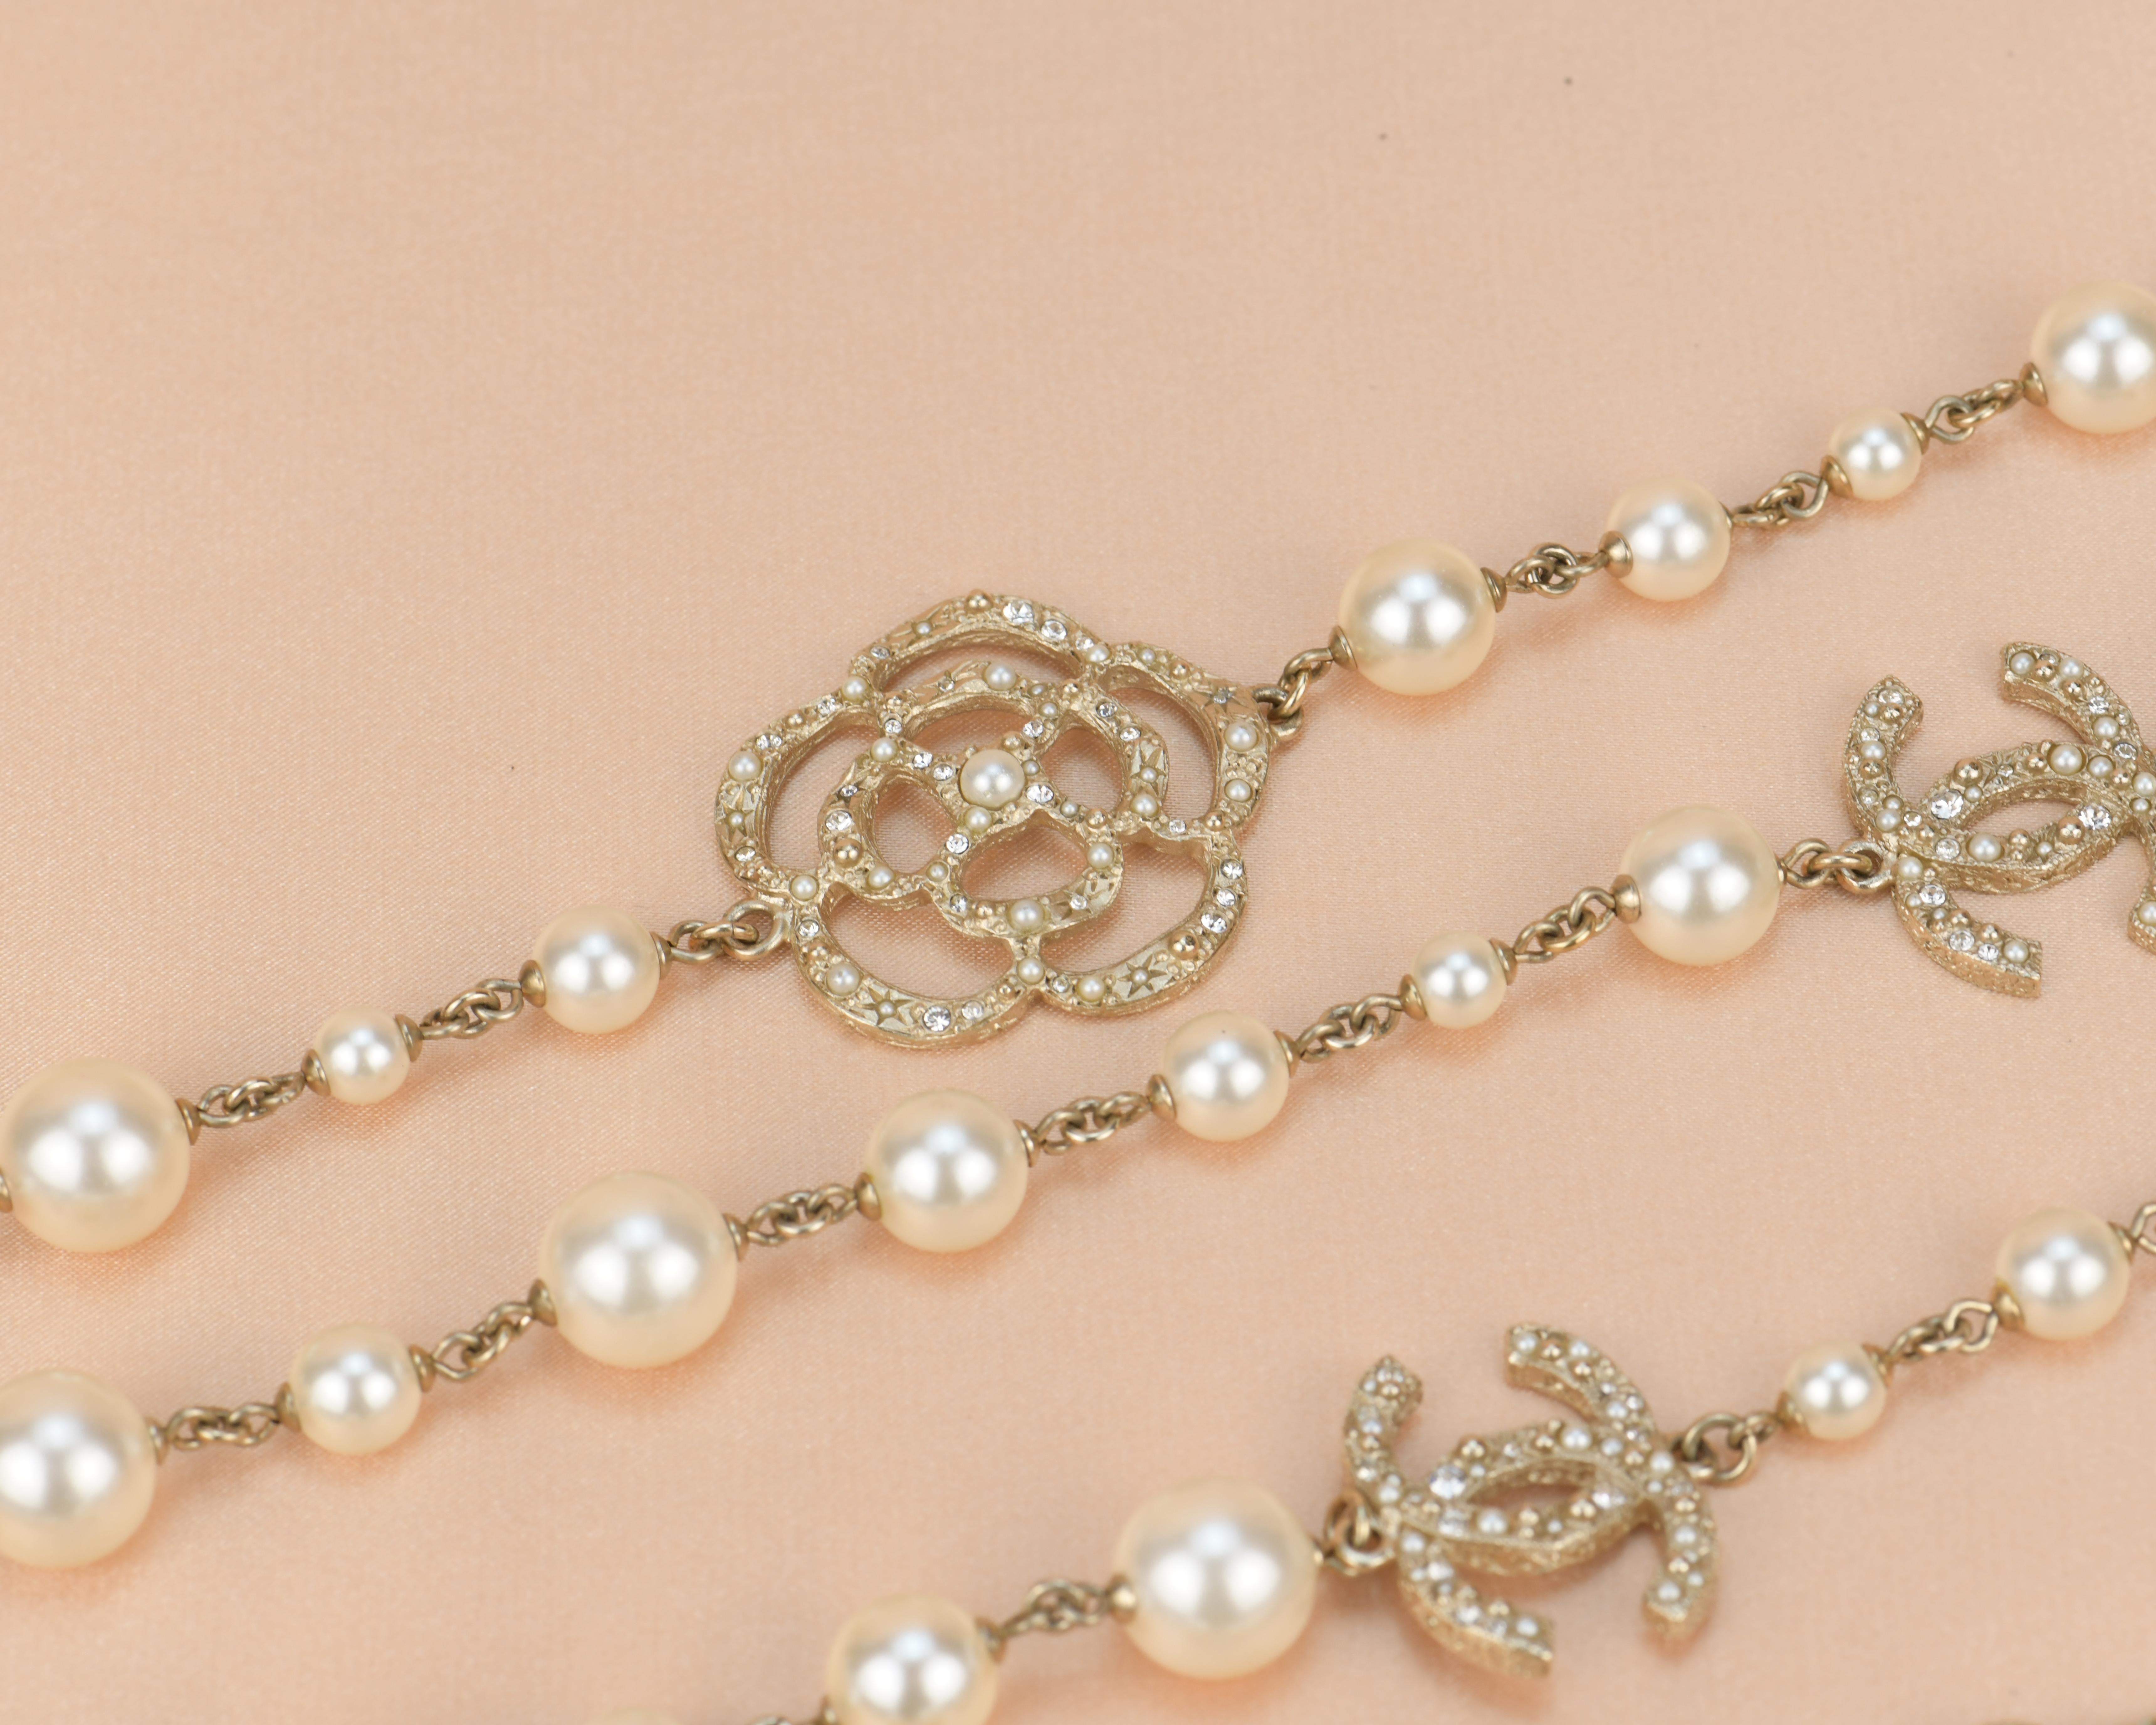 Women's or Men's Chanel CC 2014 Crystal Camellia Pearl Long Necklace